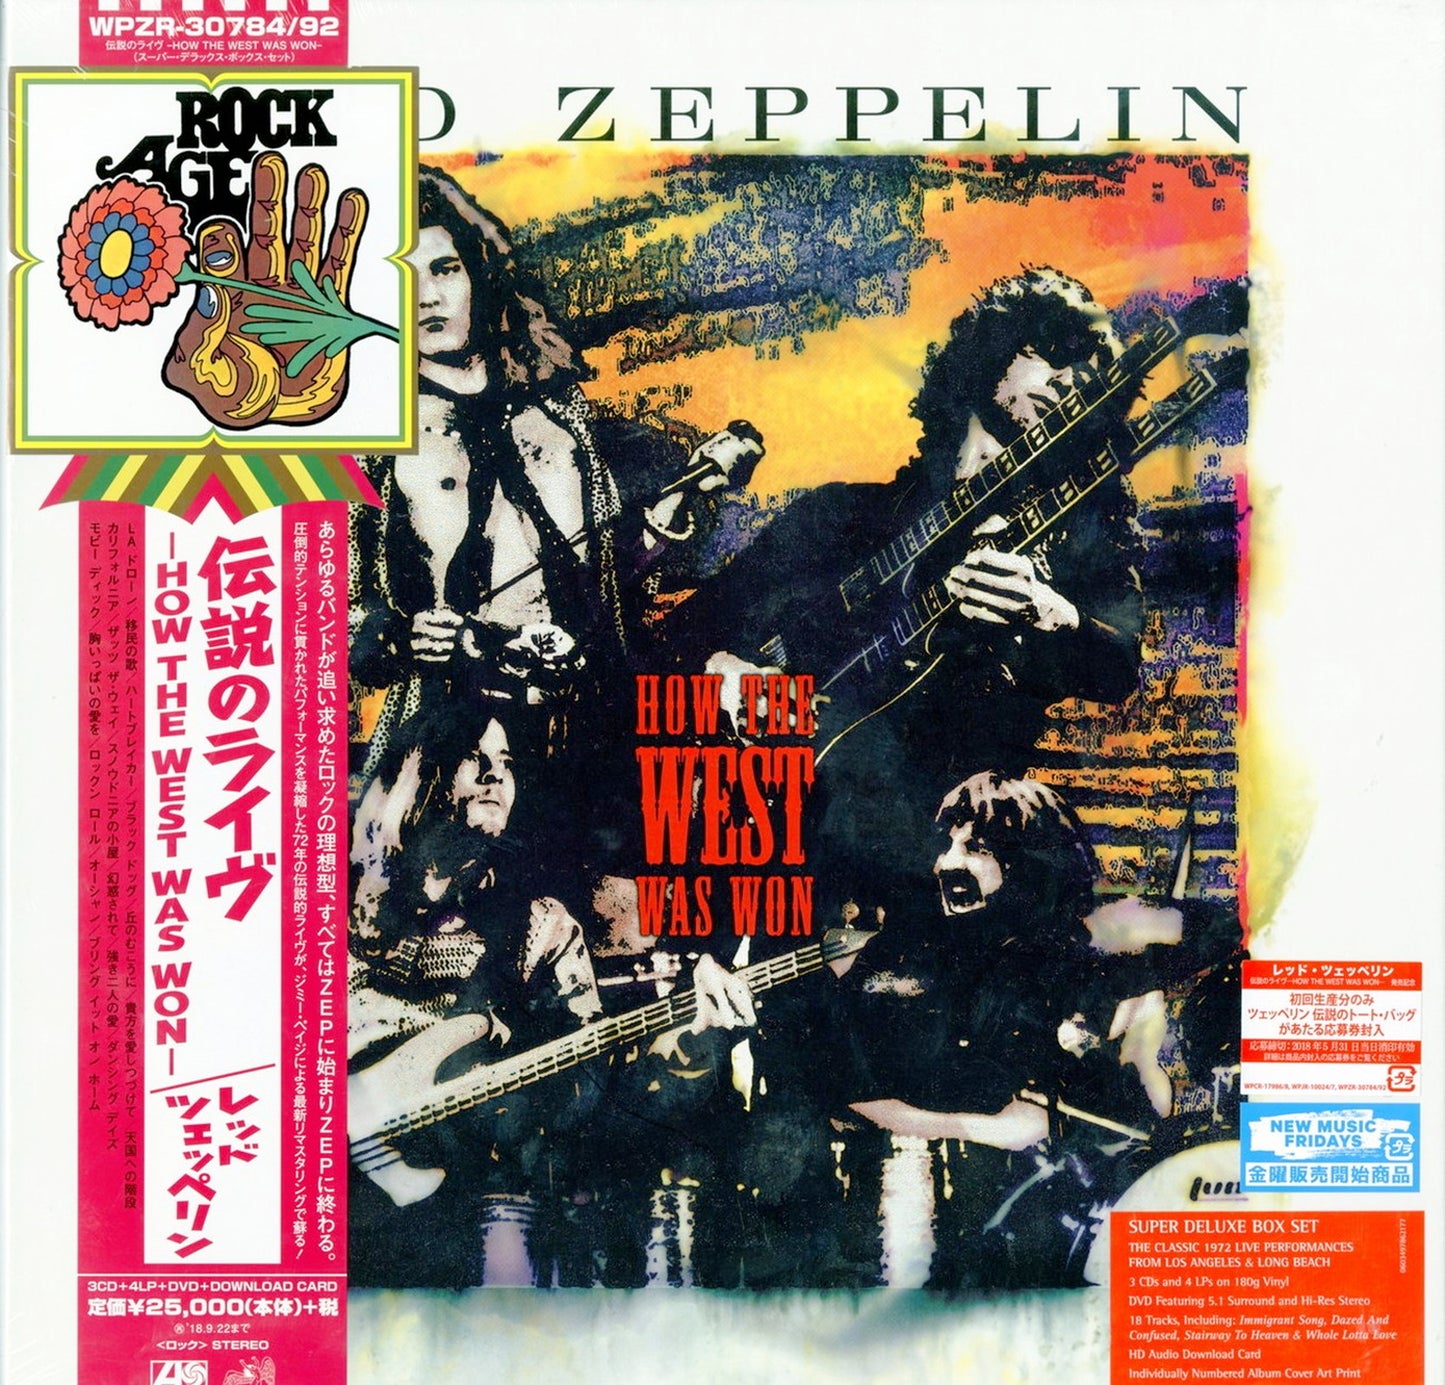 Led Zeppelin - How The West Was Won - Japan  3 CD+2 DVD Audio+4 LP Limited Edition